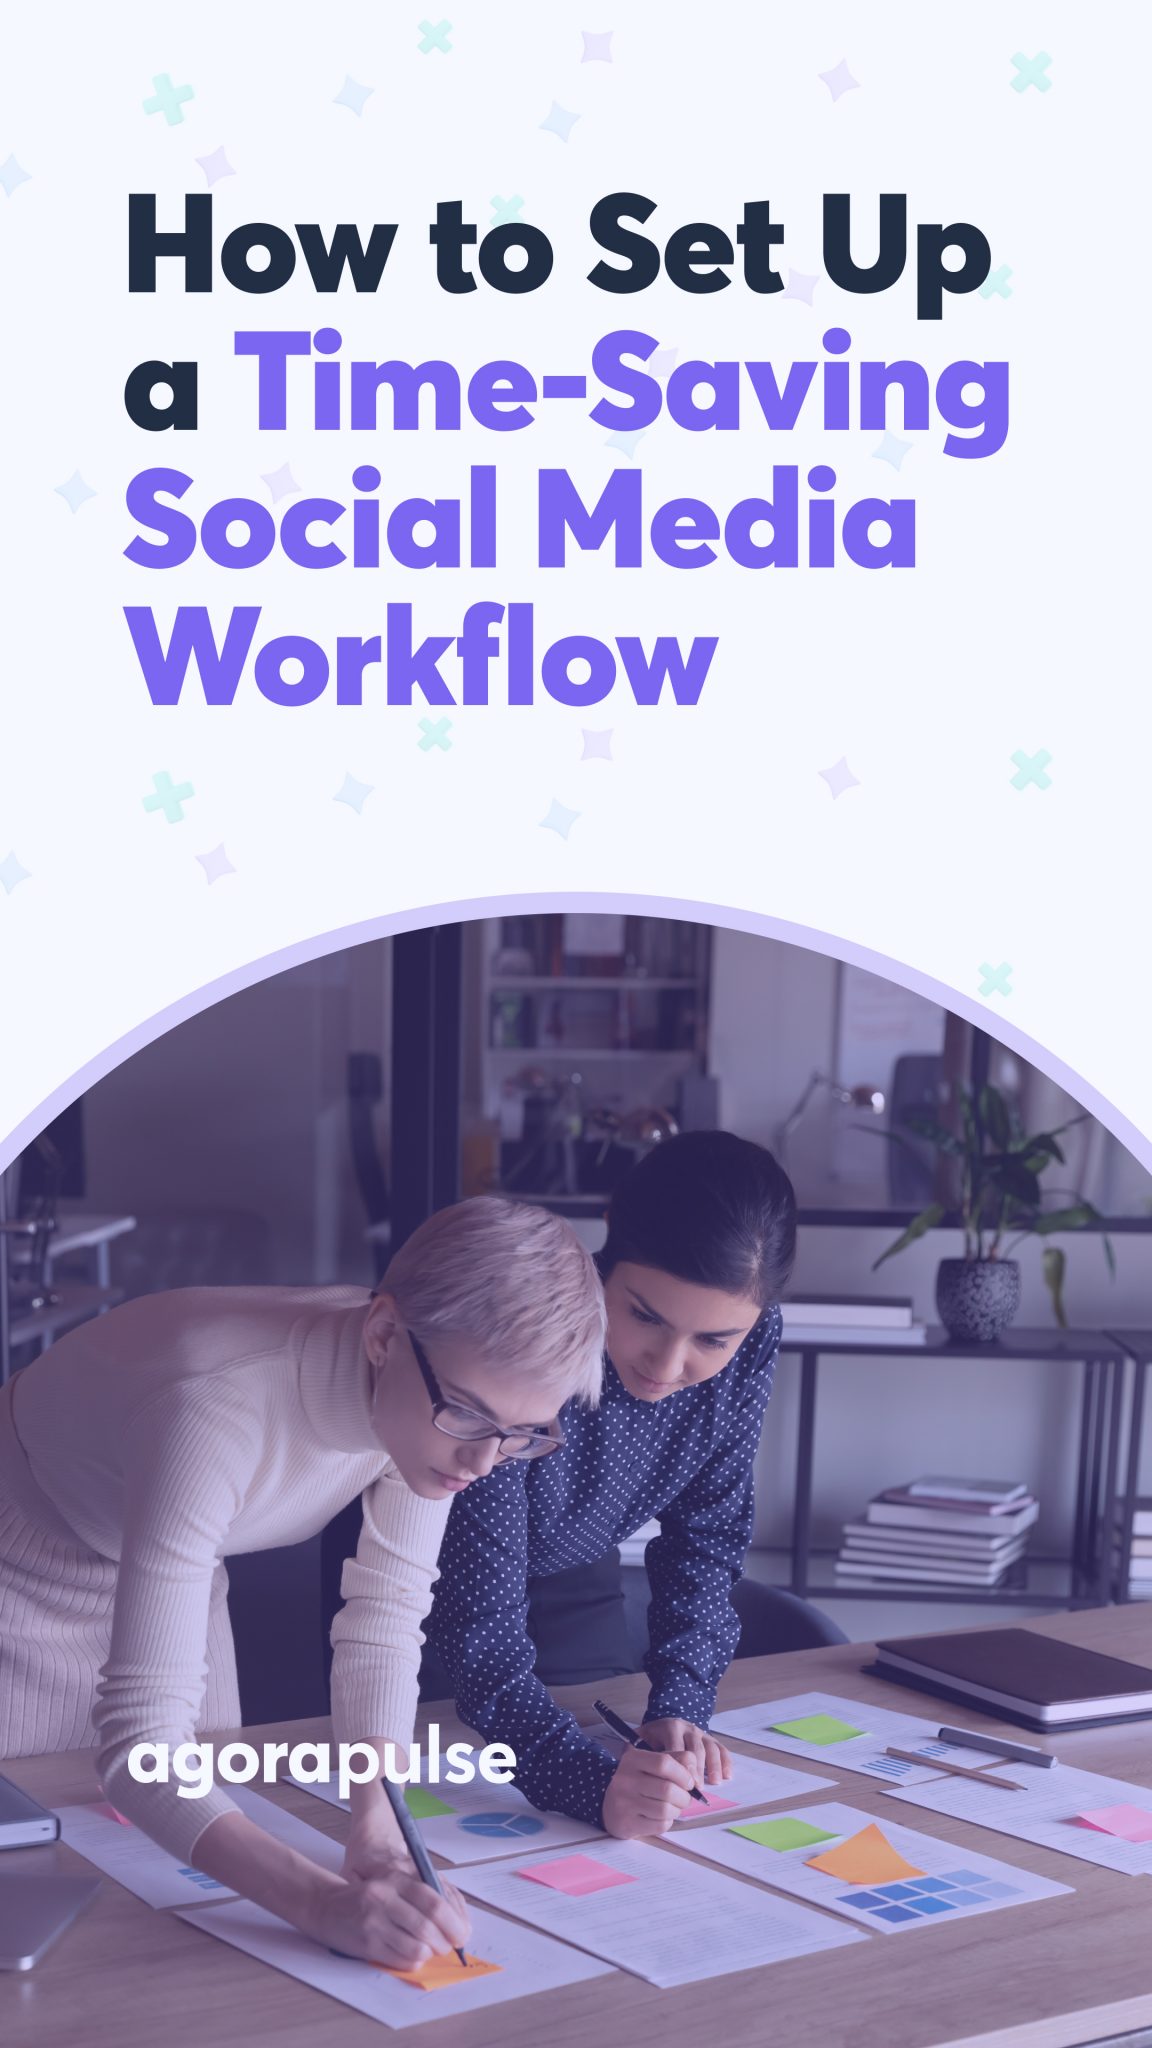 How to Set Up a Time-Saving Social Media Workflow